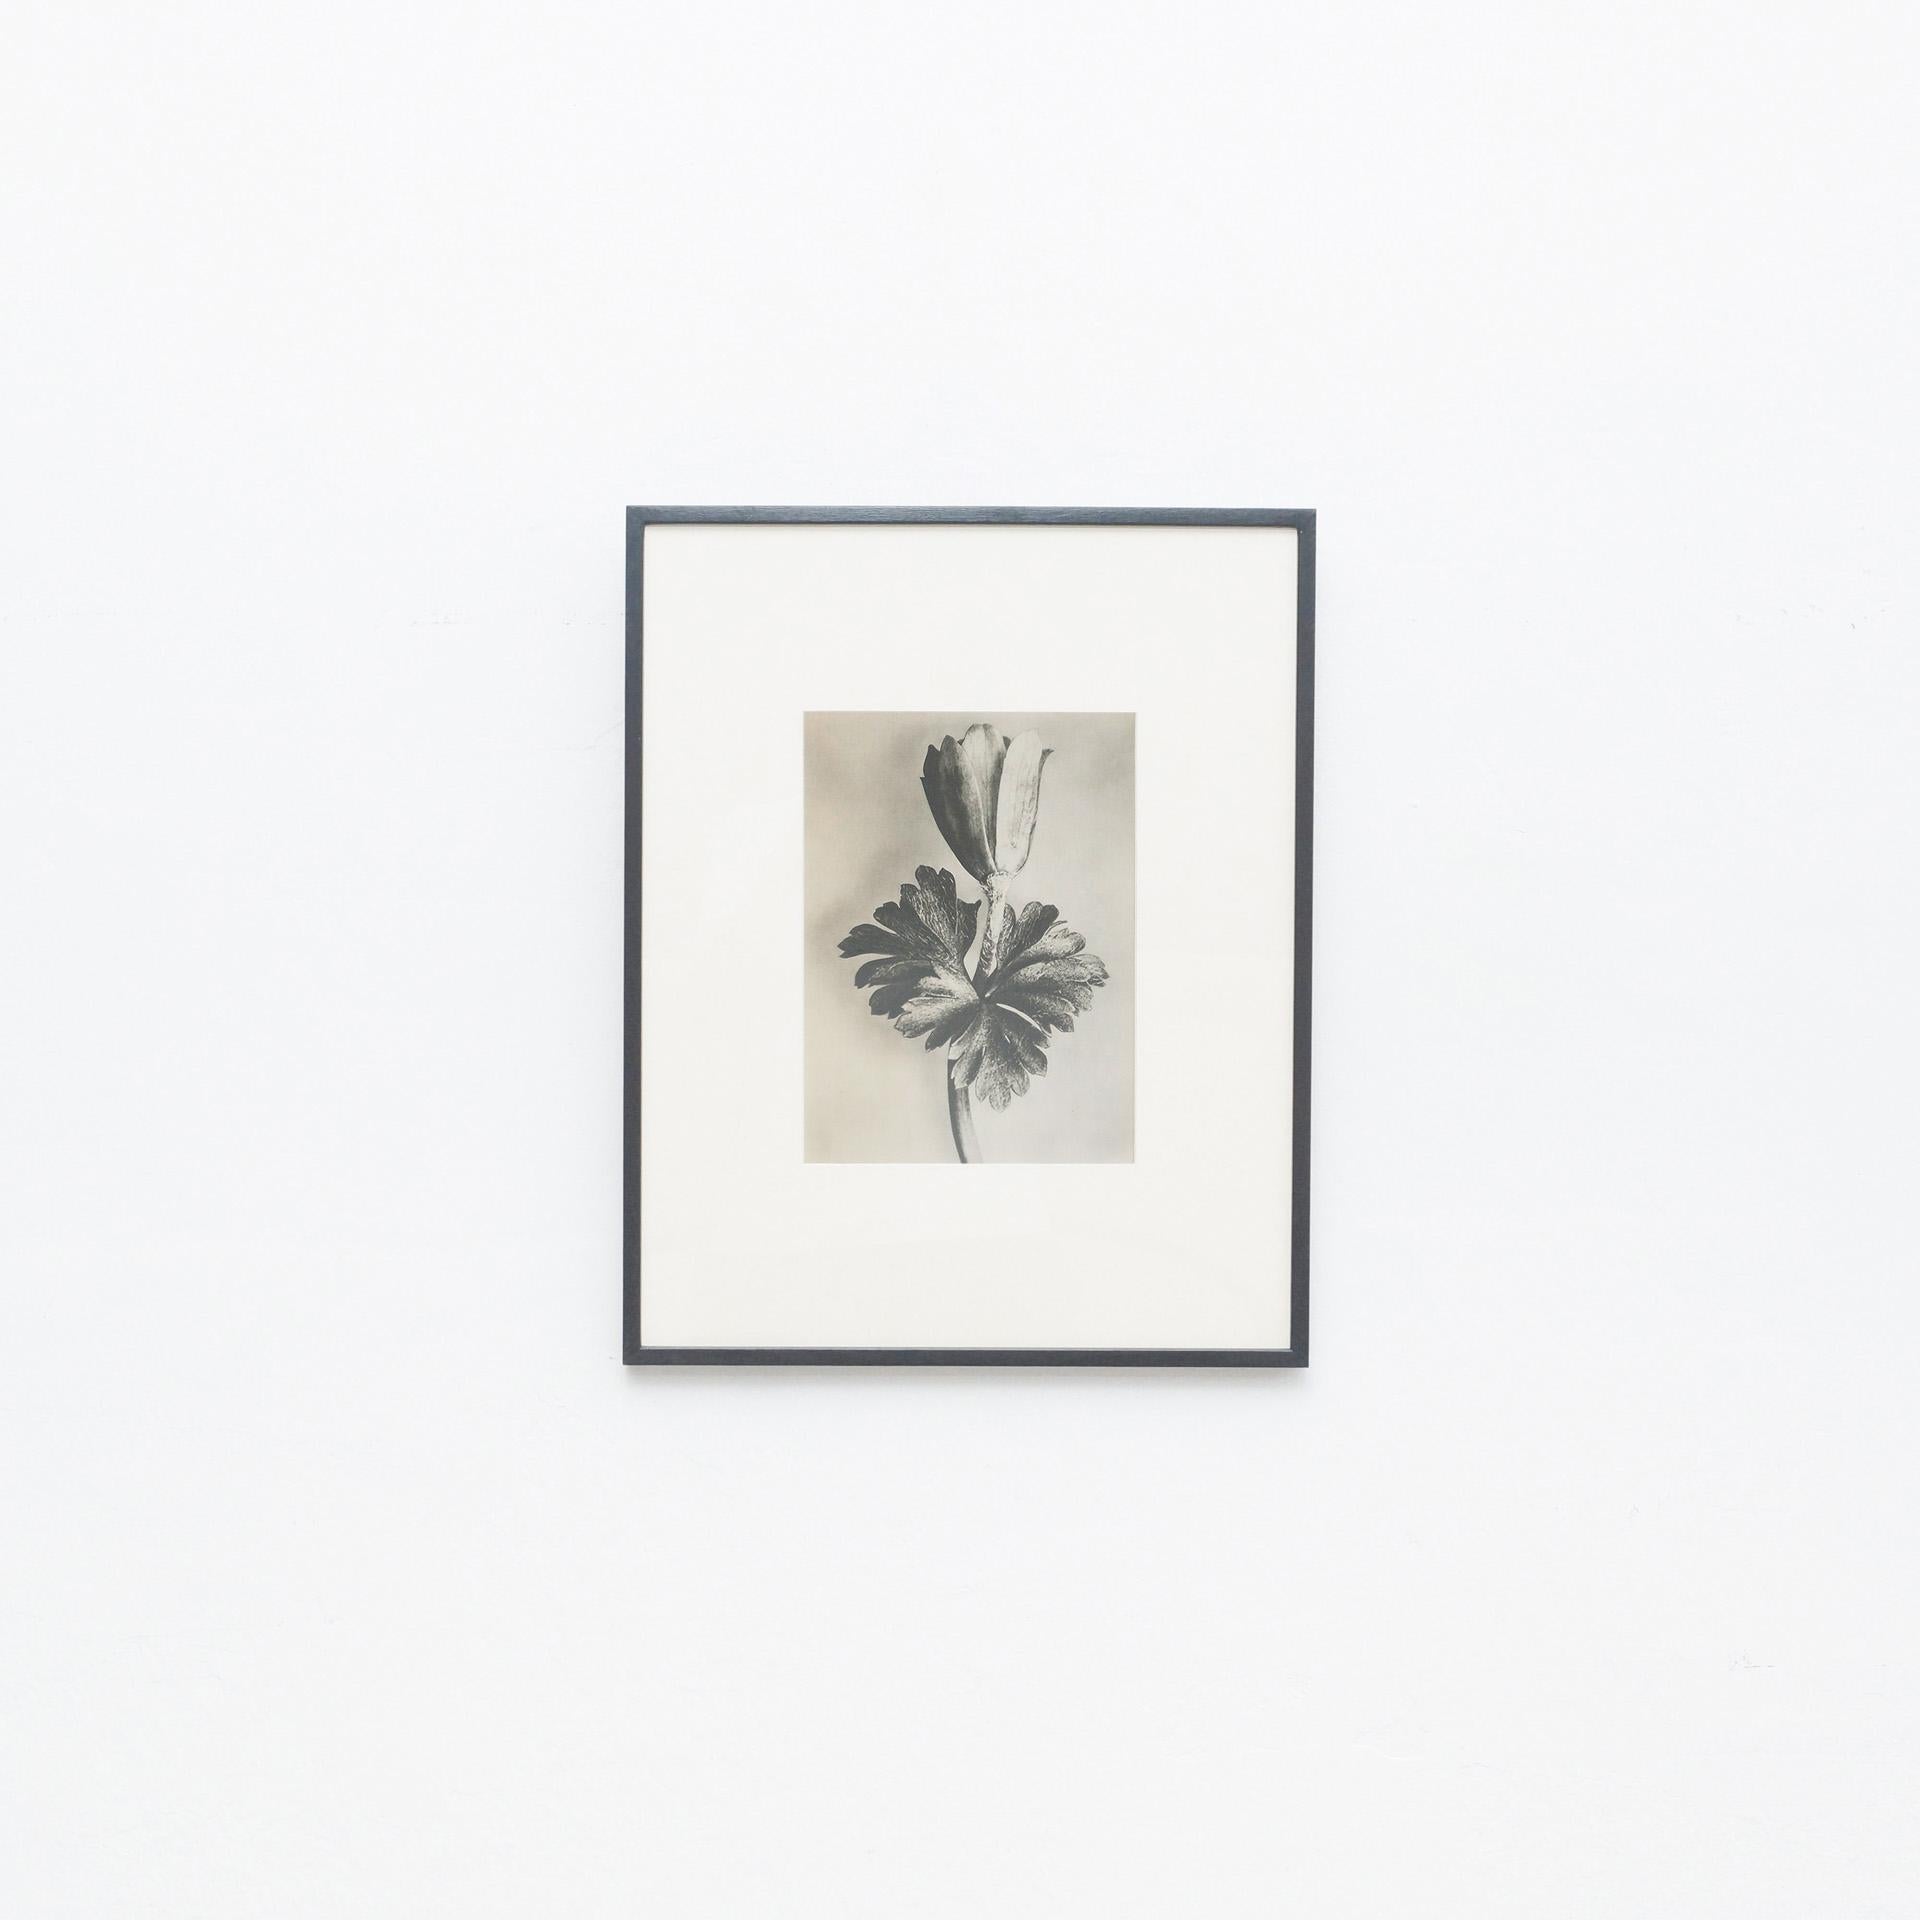 Karl Blossfeldt Photogravure from the edition of the book 'Wunder in der Natur' in 1942.

In original condition, with minor wear consistent with age and use, preserving a beautiful patina.

Karl Blossfeldt (June 13, 1865-December 9, 1932) was a